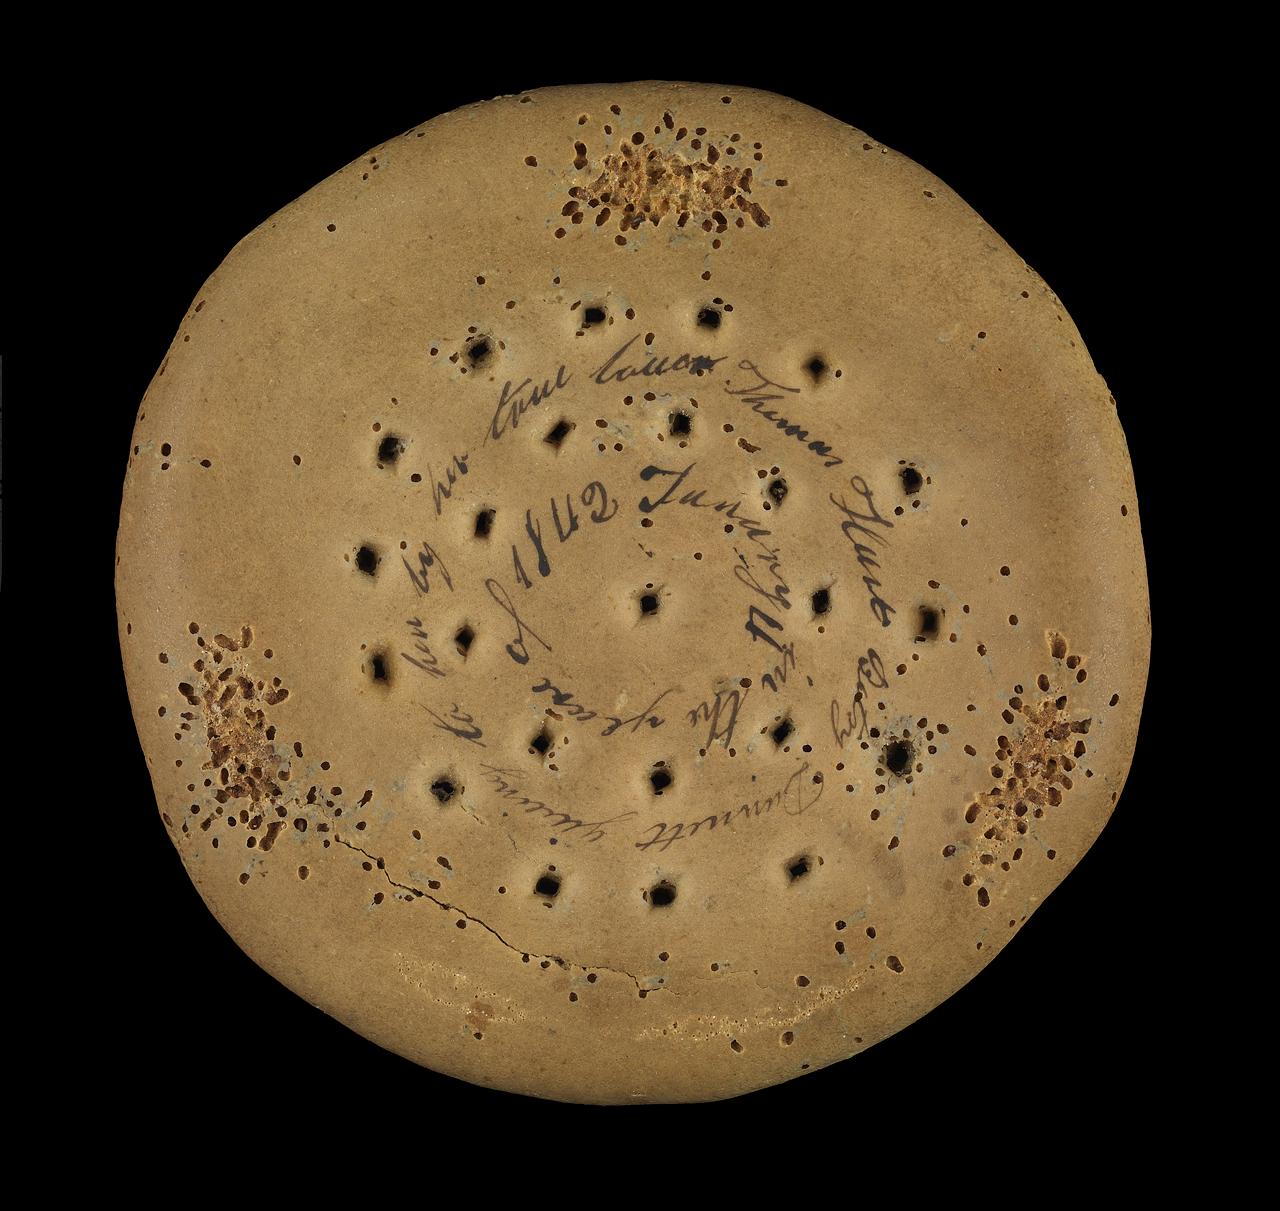 A ship's biscuit circular in shape and perforated with holes as an aid to baking